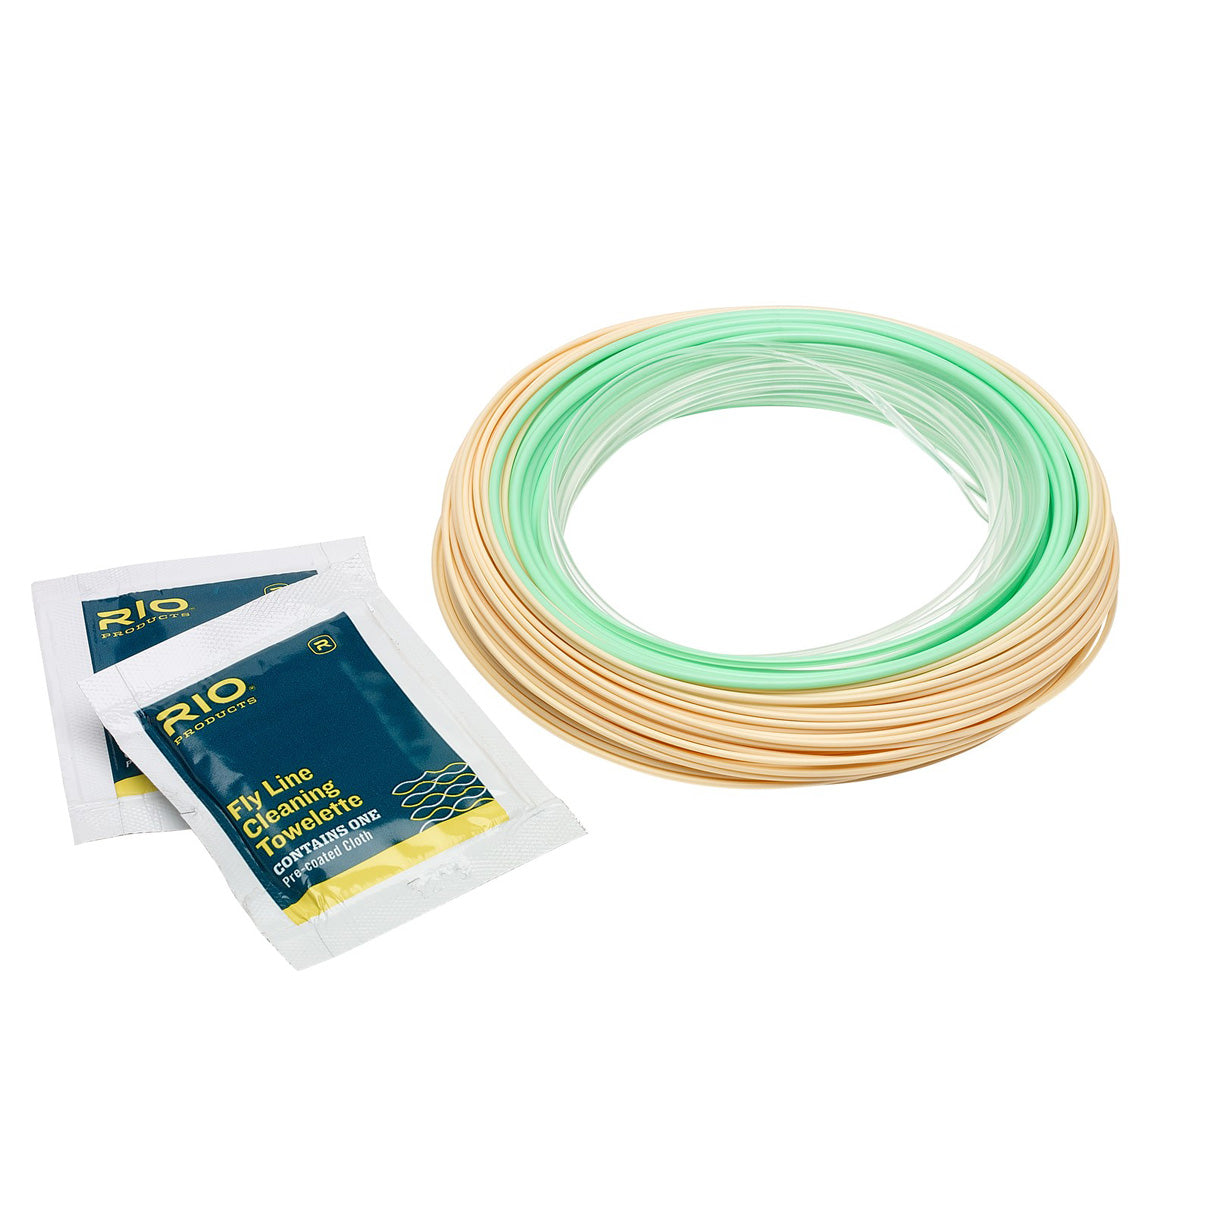 Rio Premier Tarpon Clear Tip Floating Fly Line - Fin & Fire Fly Shop